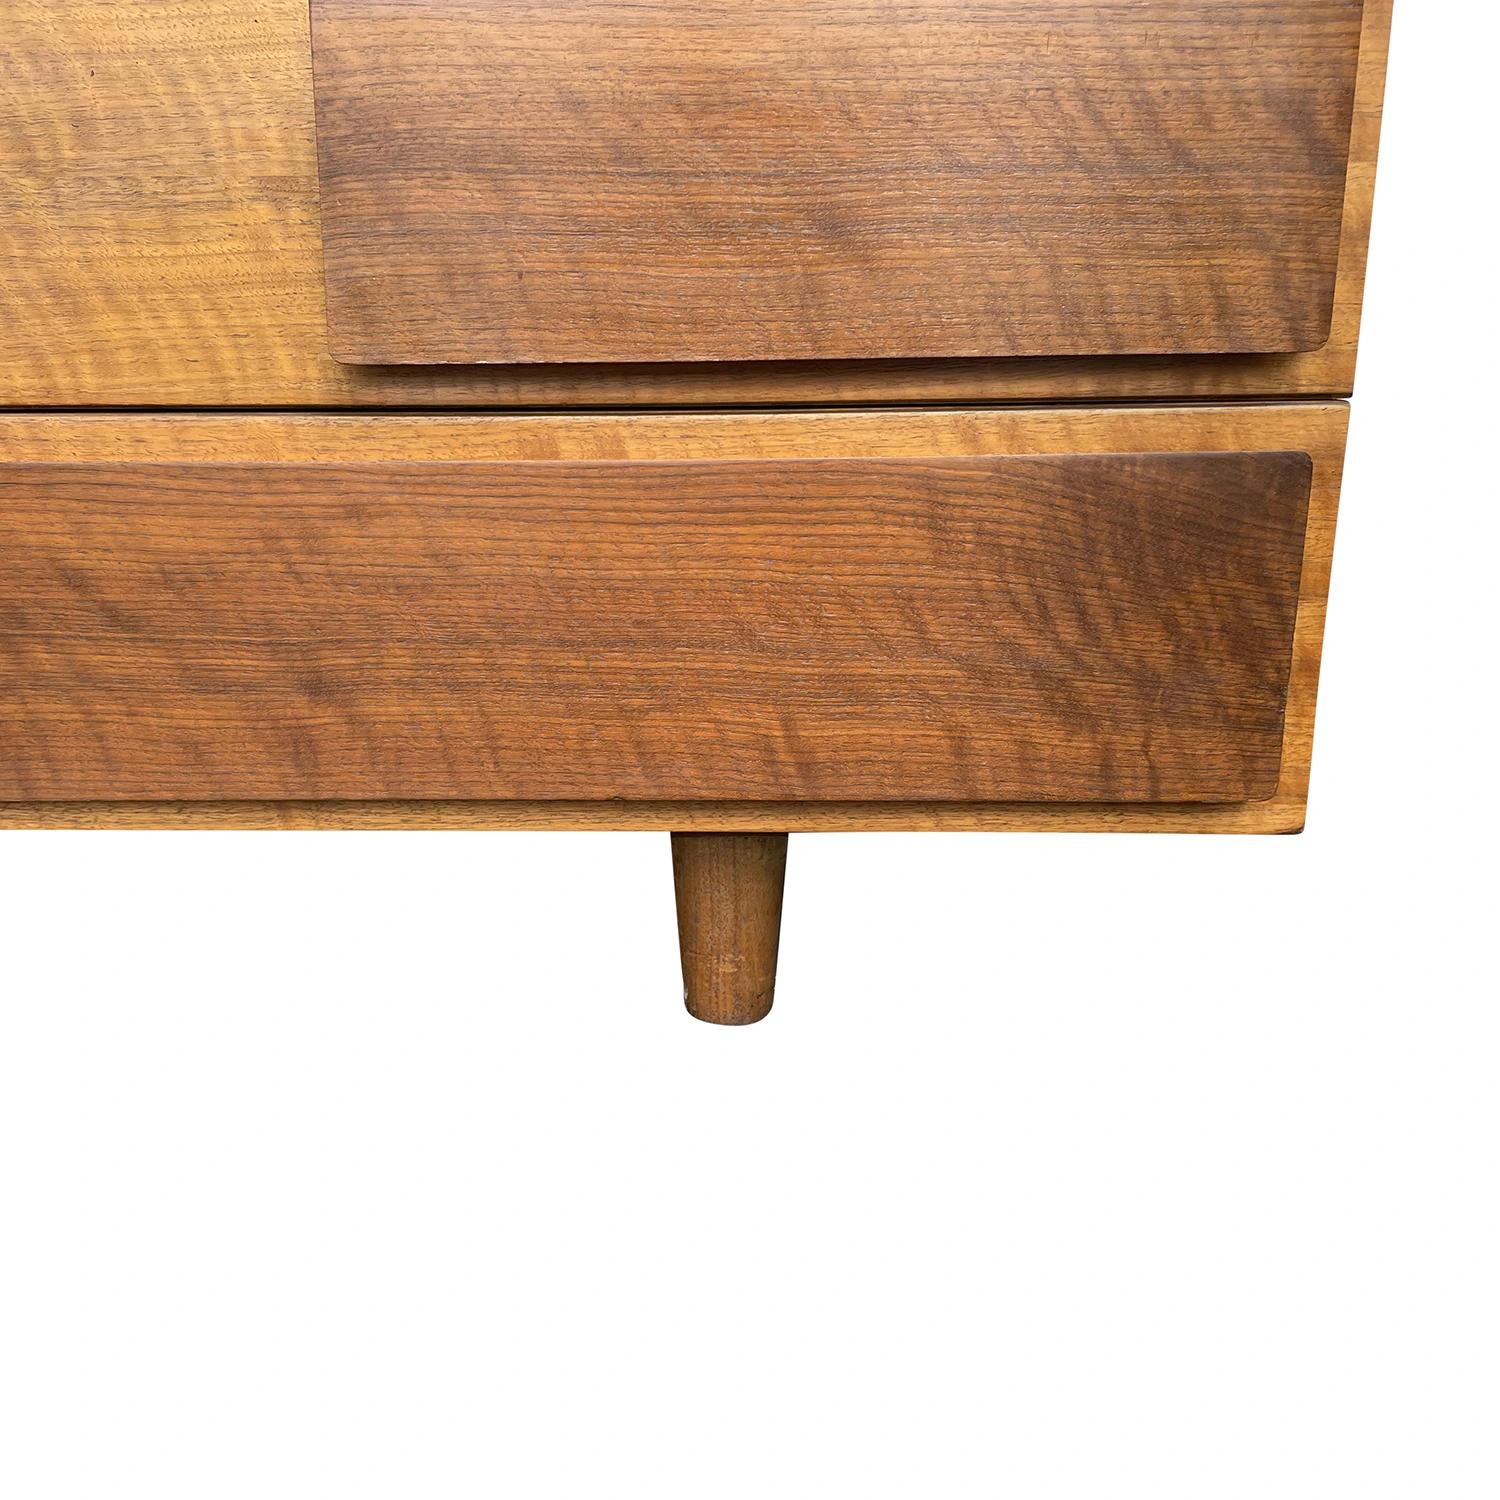 20th Century Brown Italian Walnut M. Singer & Sons Dresser, Cabinet by Gio Ponti For Sale 13